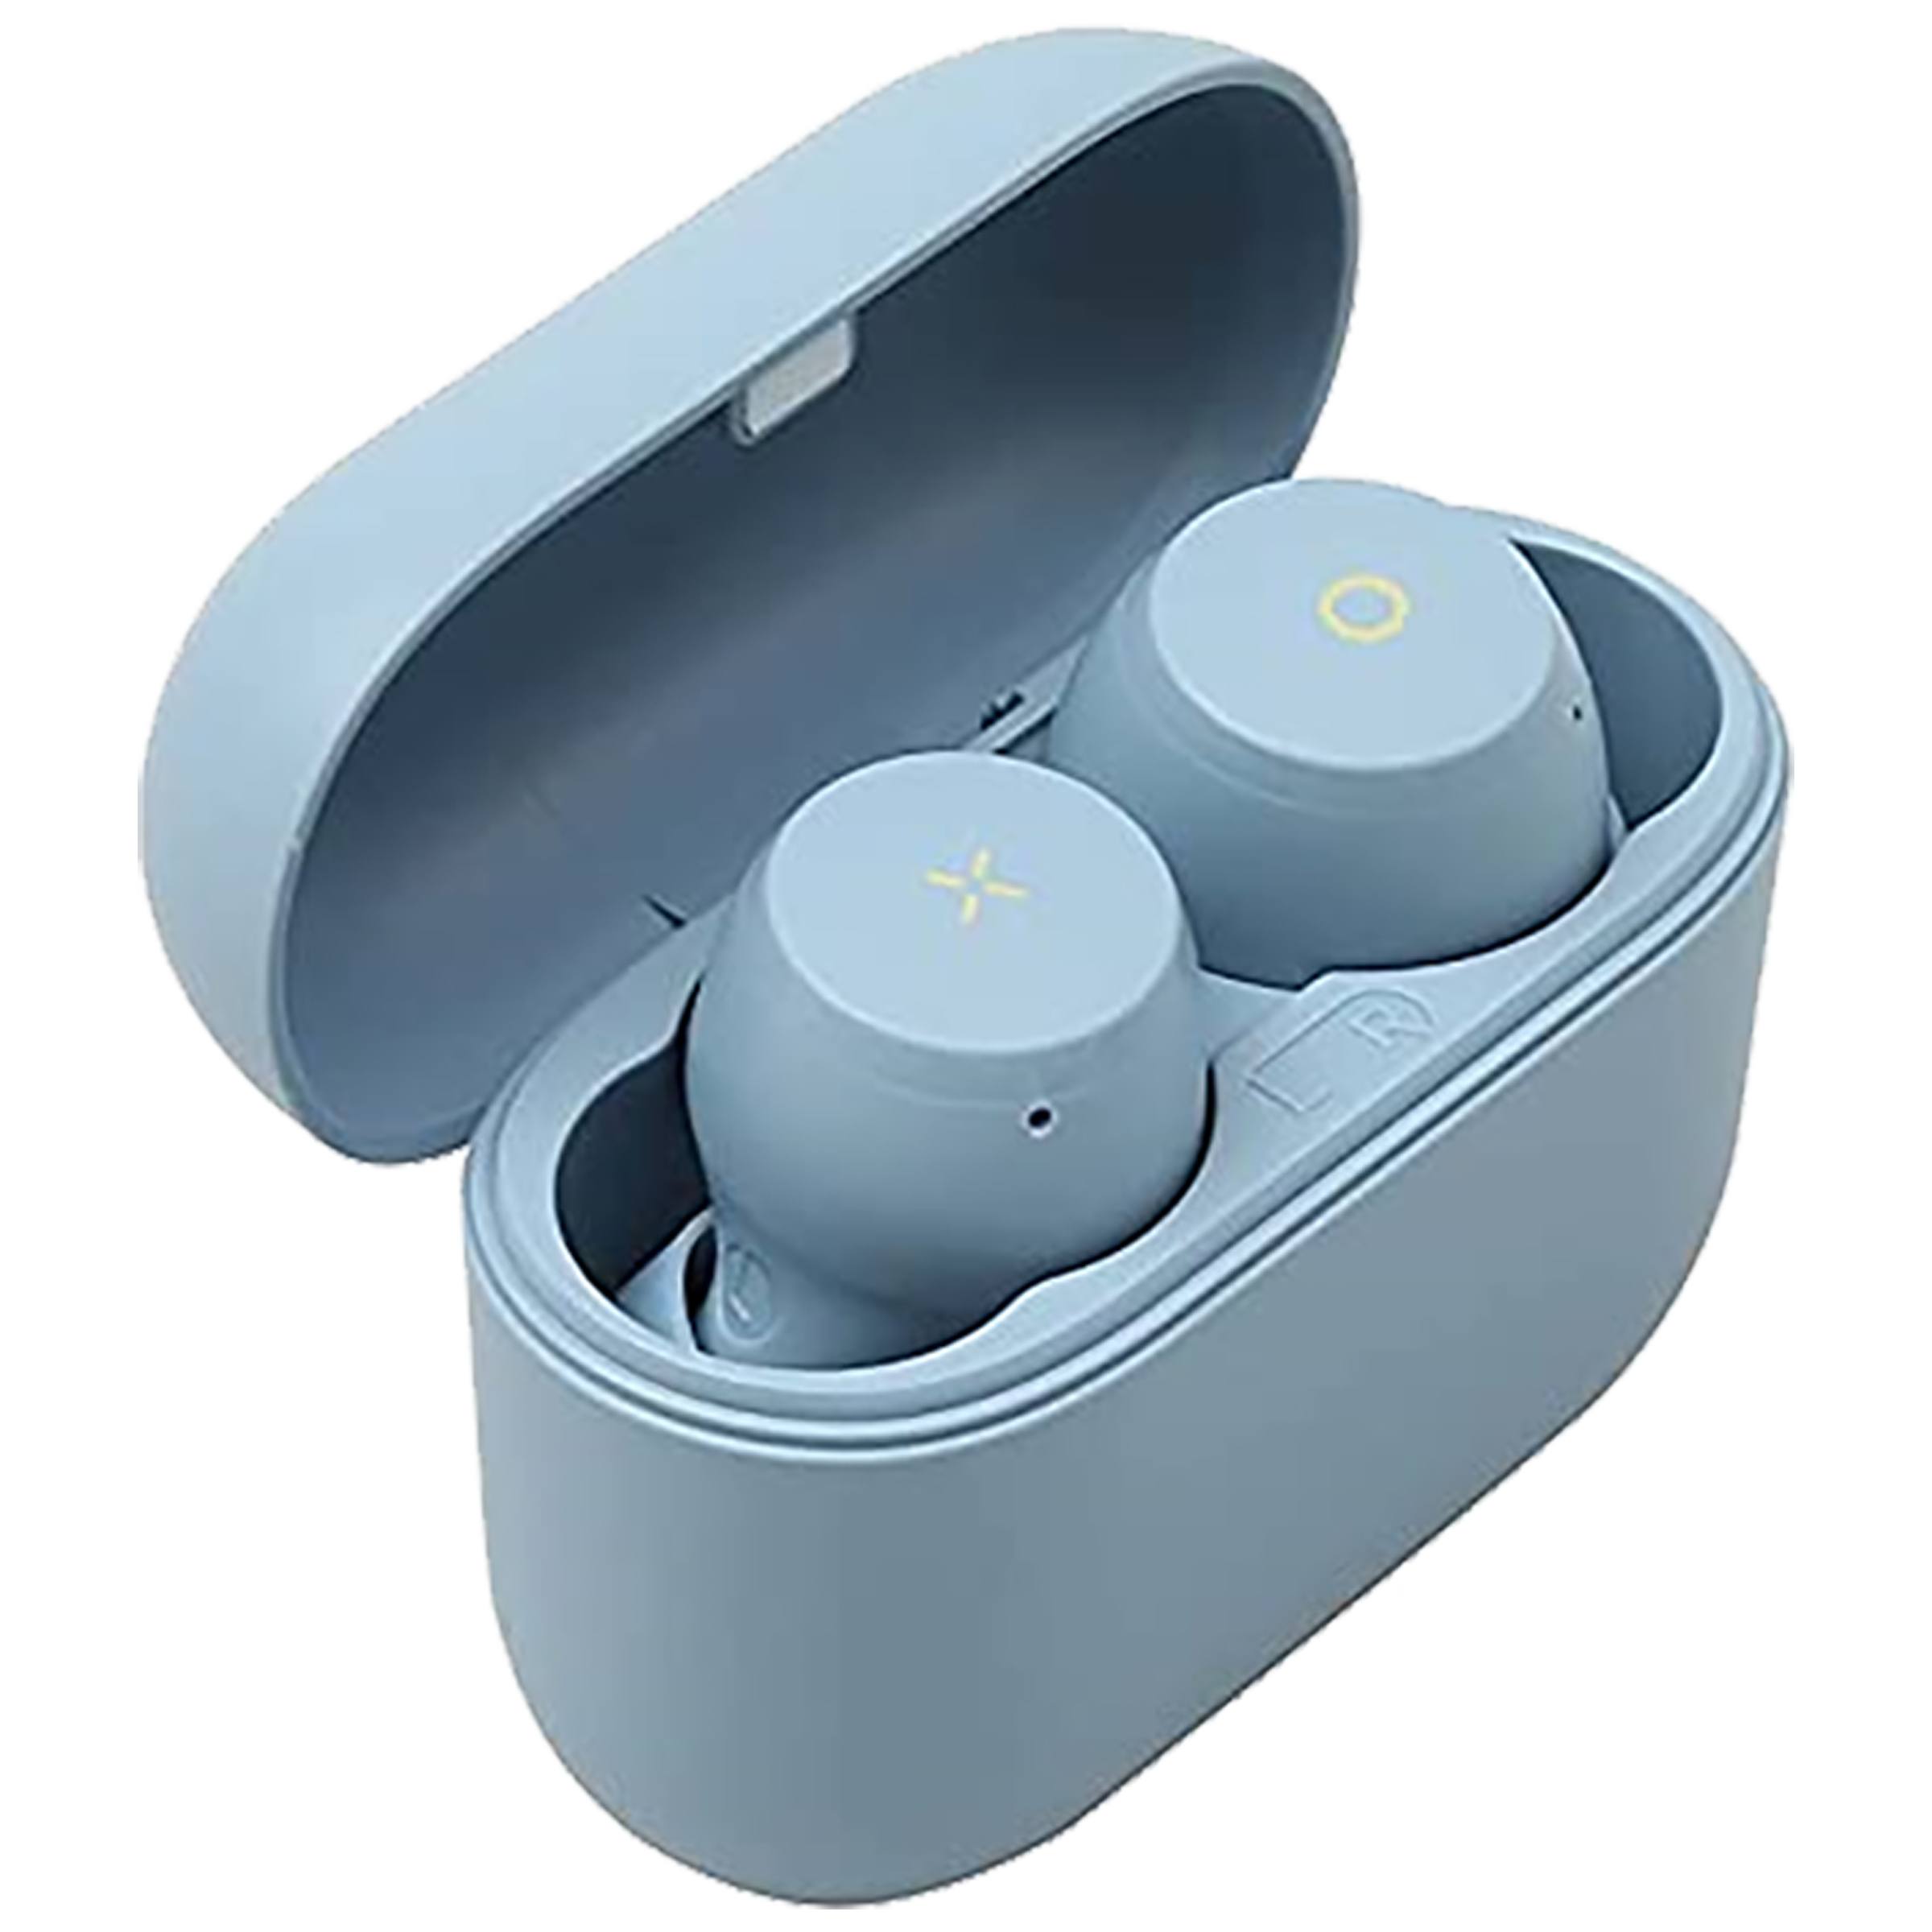 Edifier X3 T0 U In-Ear Truly Wireless Earbuds with Mic (Bluetooth 4.0, IP55 Rated Dust Resistance and Waterproof, Dark Blue)_1